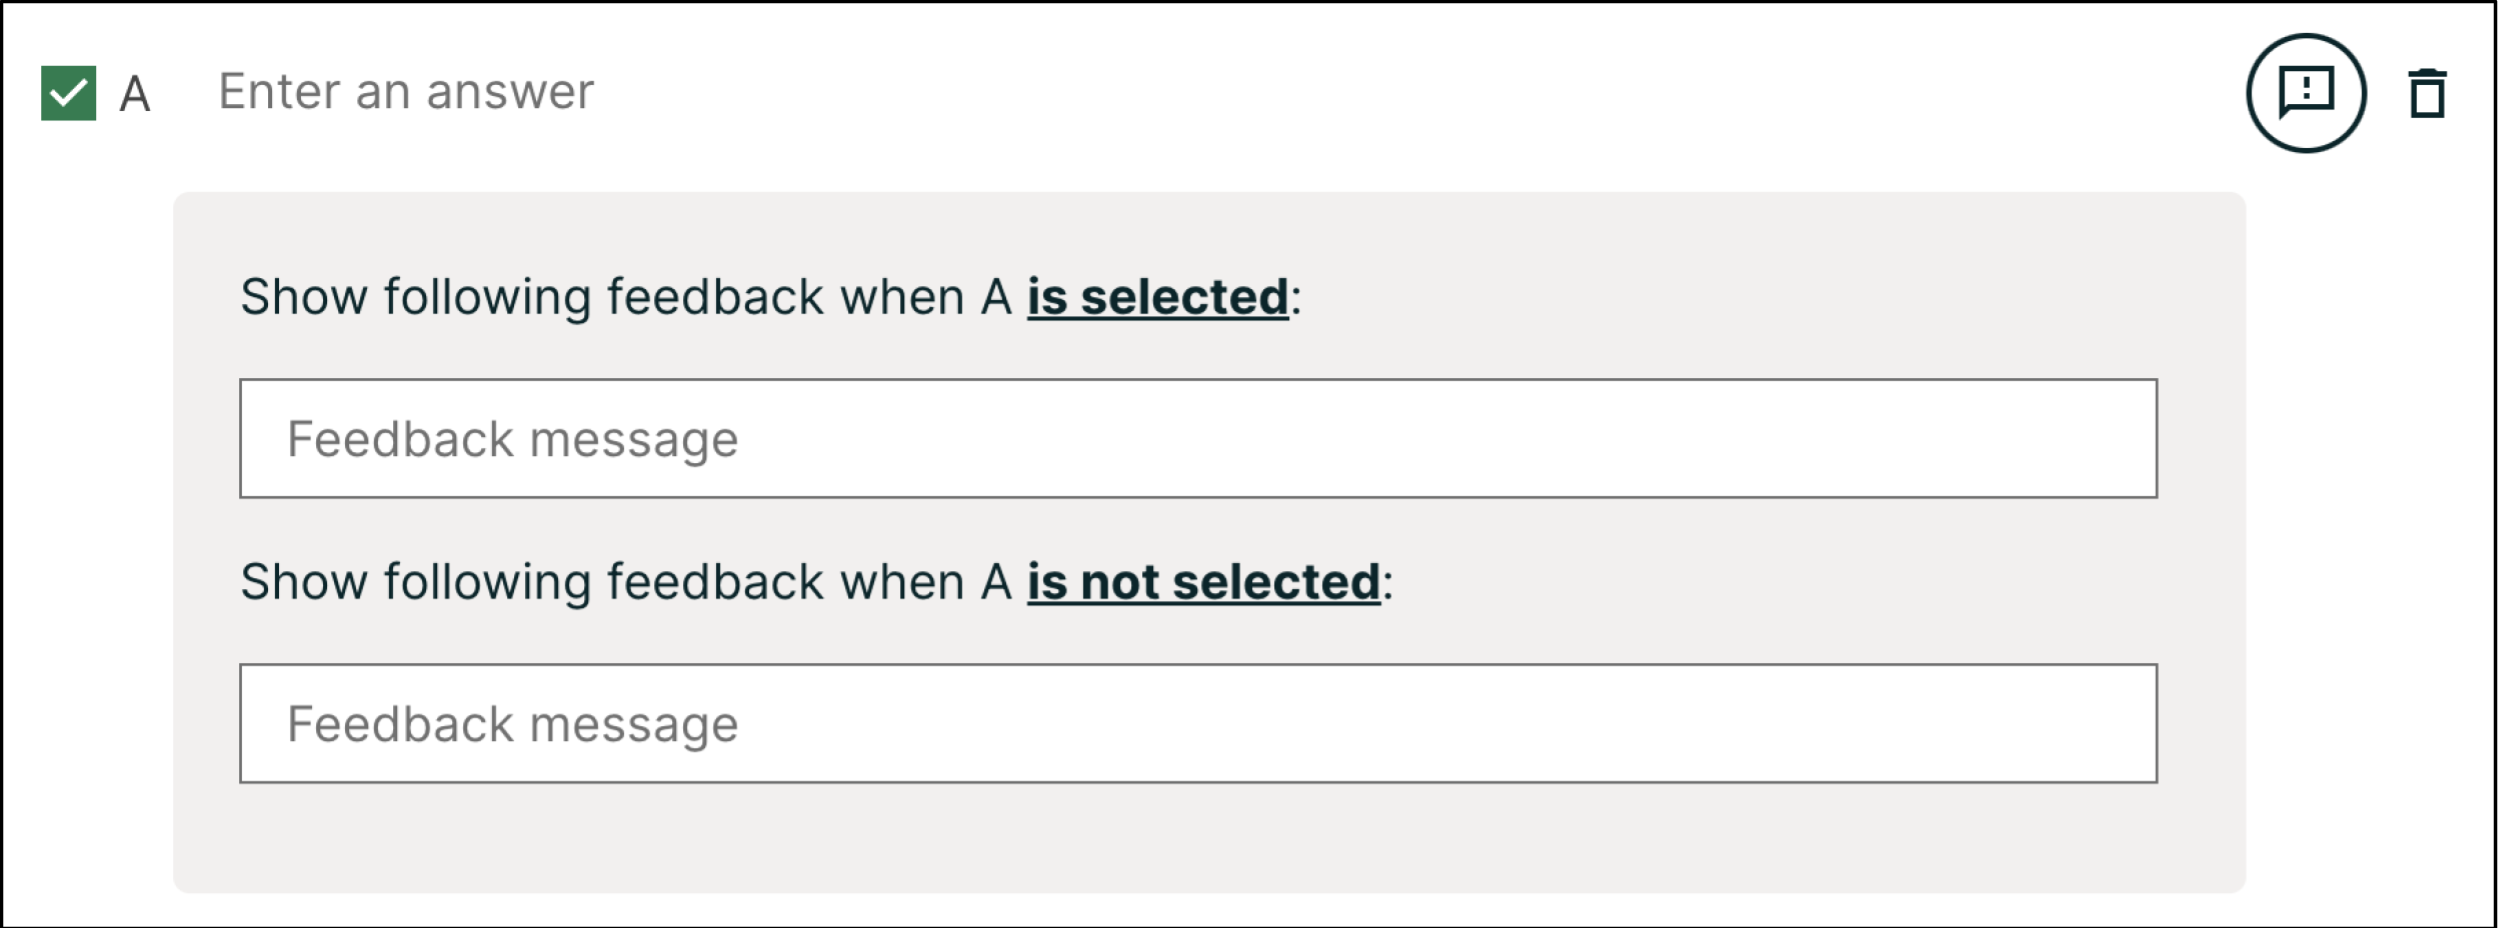 An image of the feedback section. There are options for when the student's answer is selected.